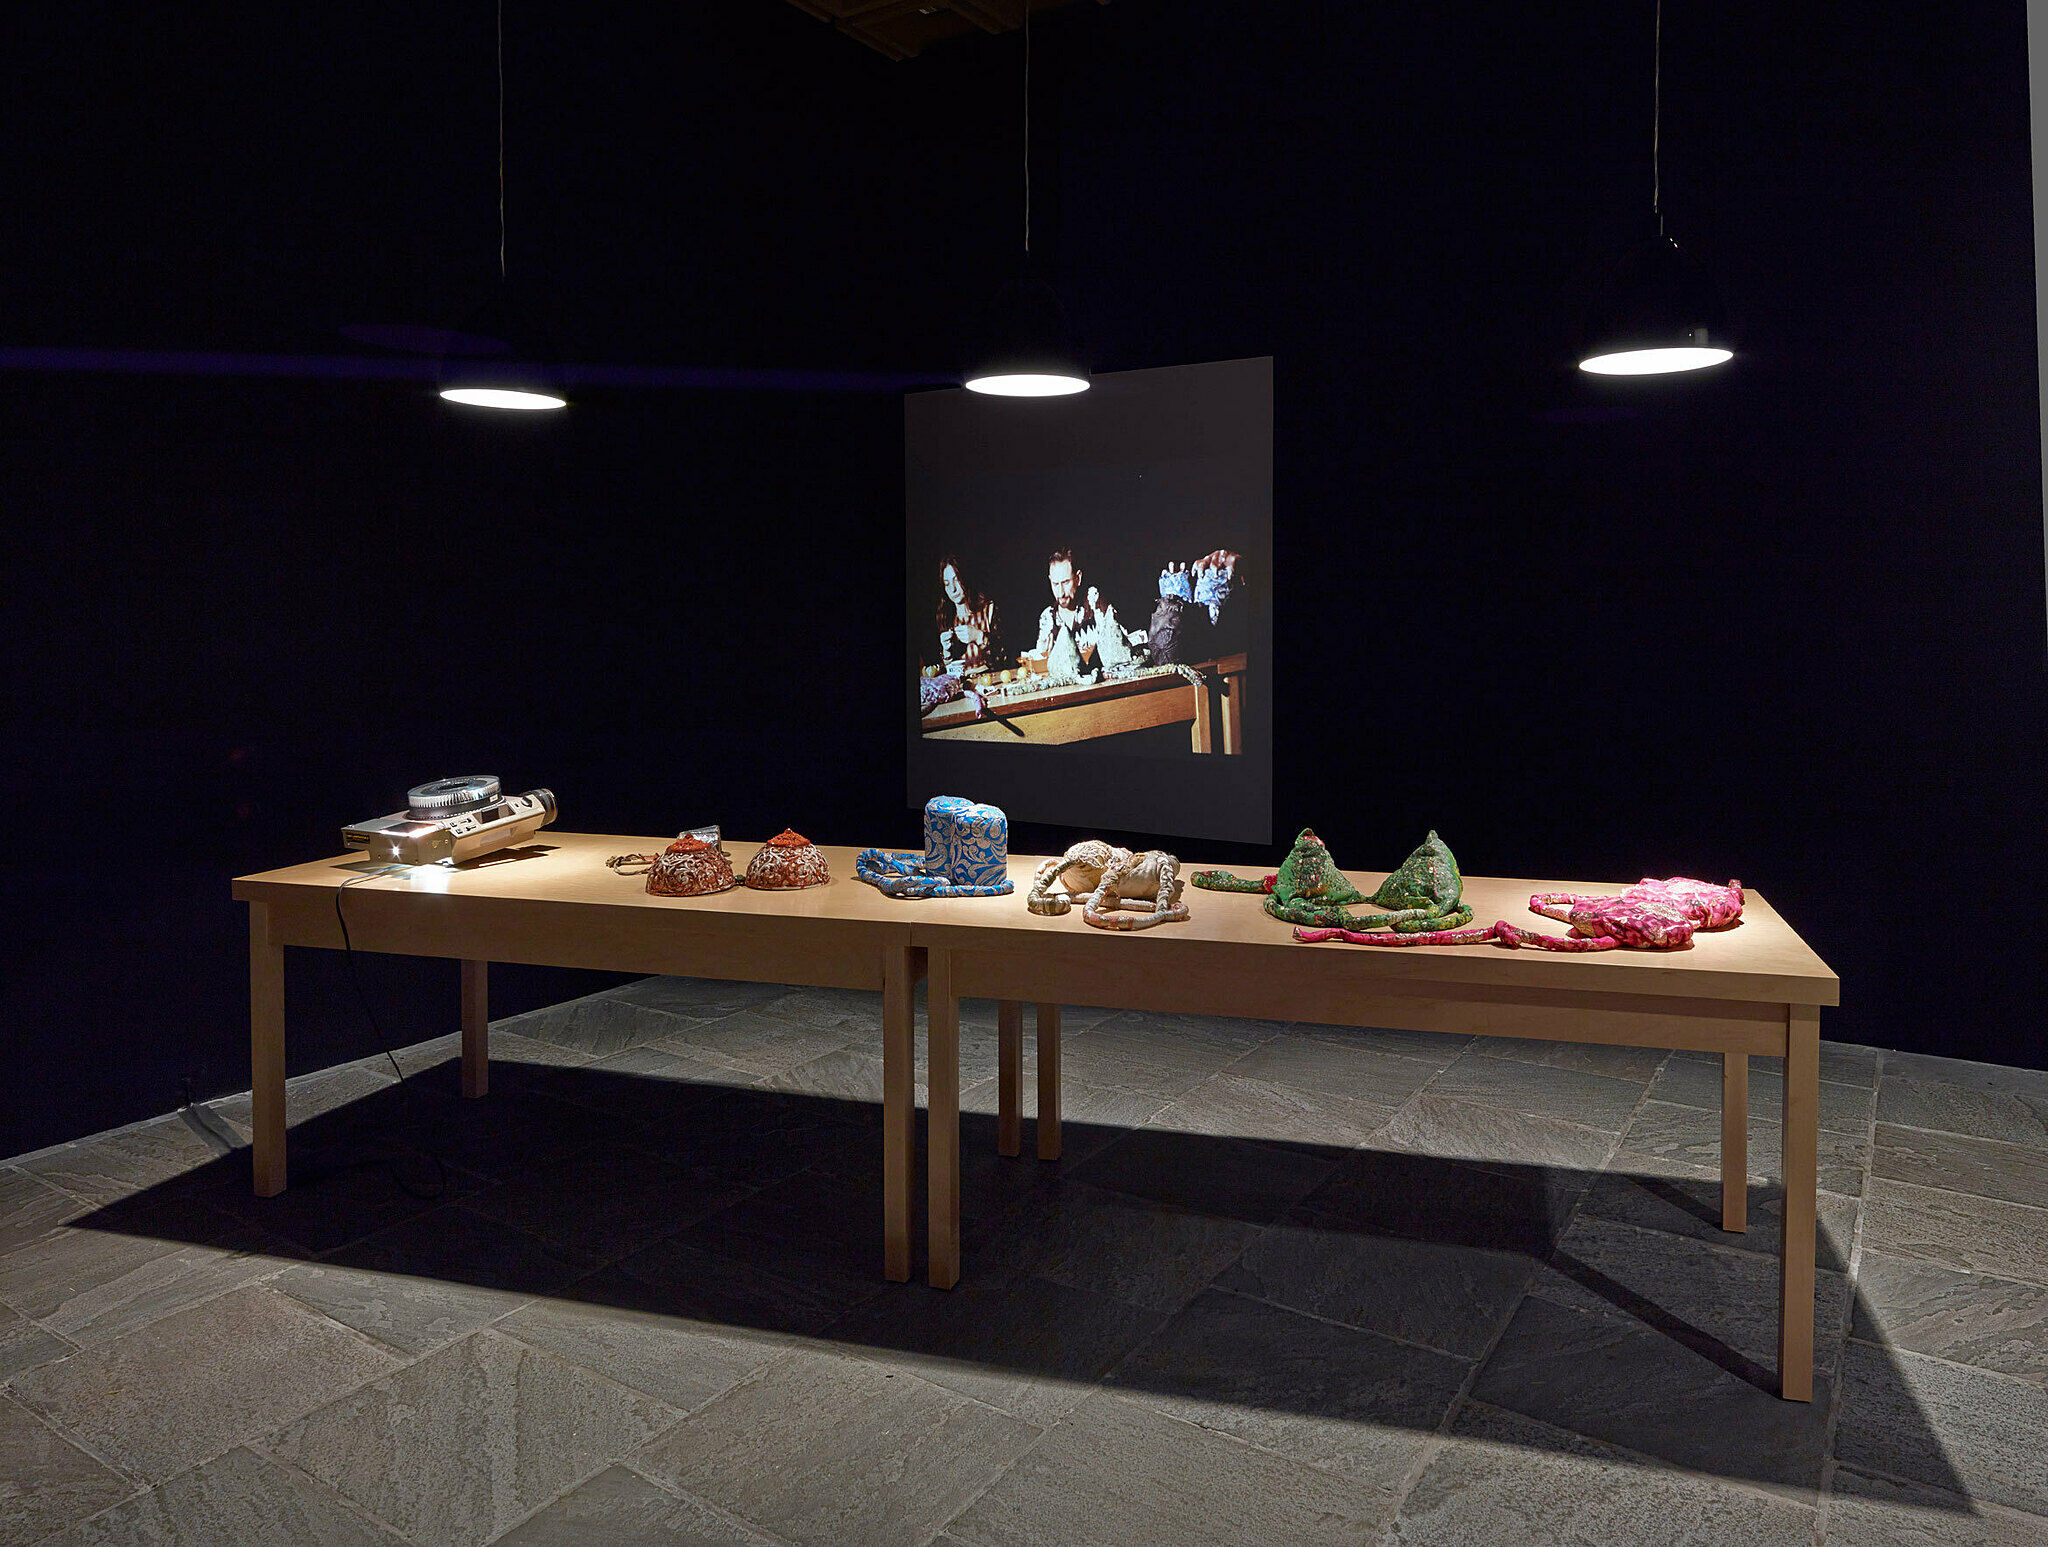 A table in front of a video still for an art installation.